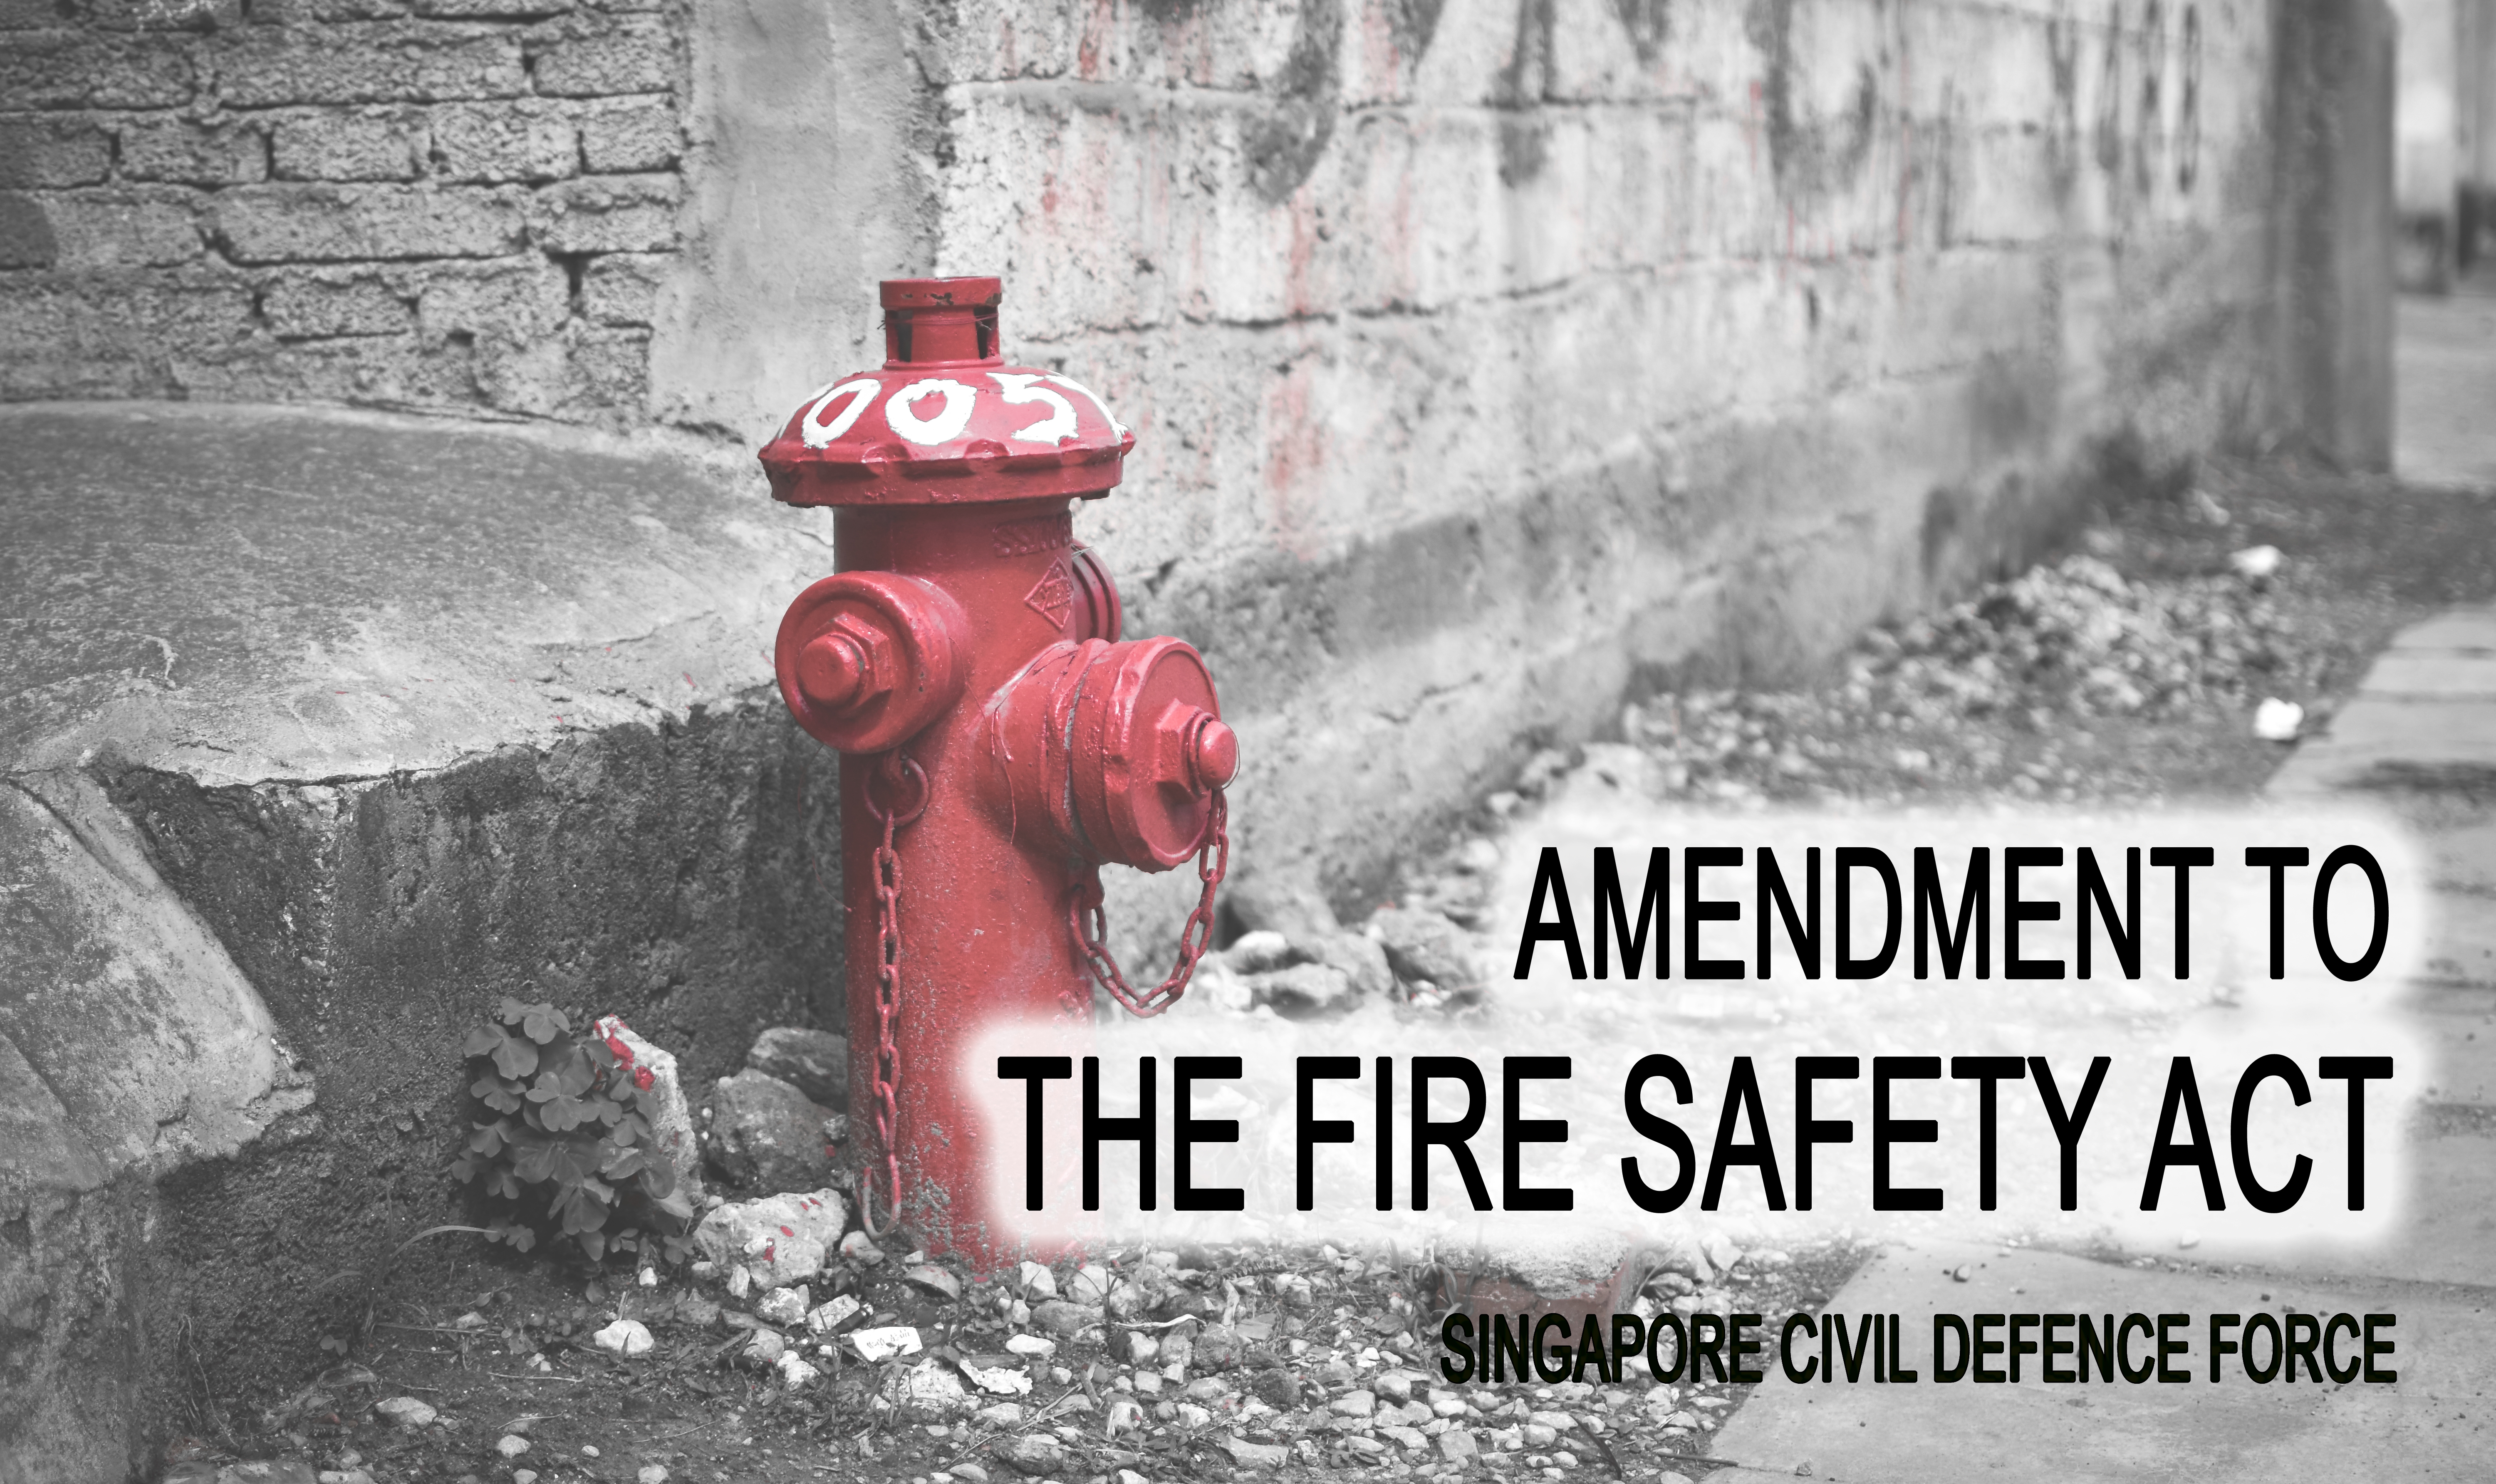 AMENDMENT TO THE FIRE SAFETY ACT